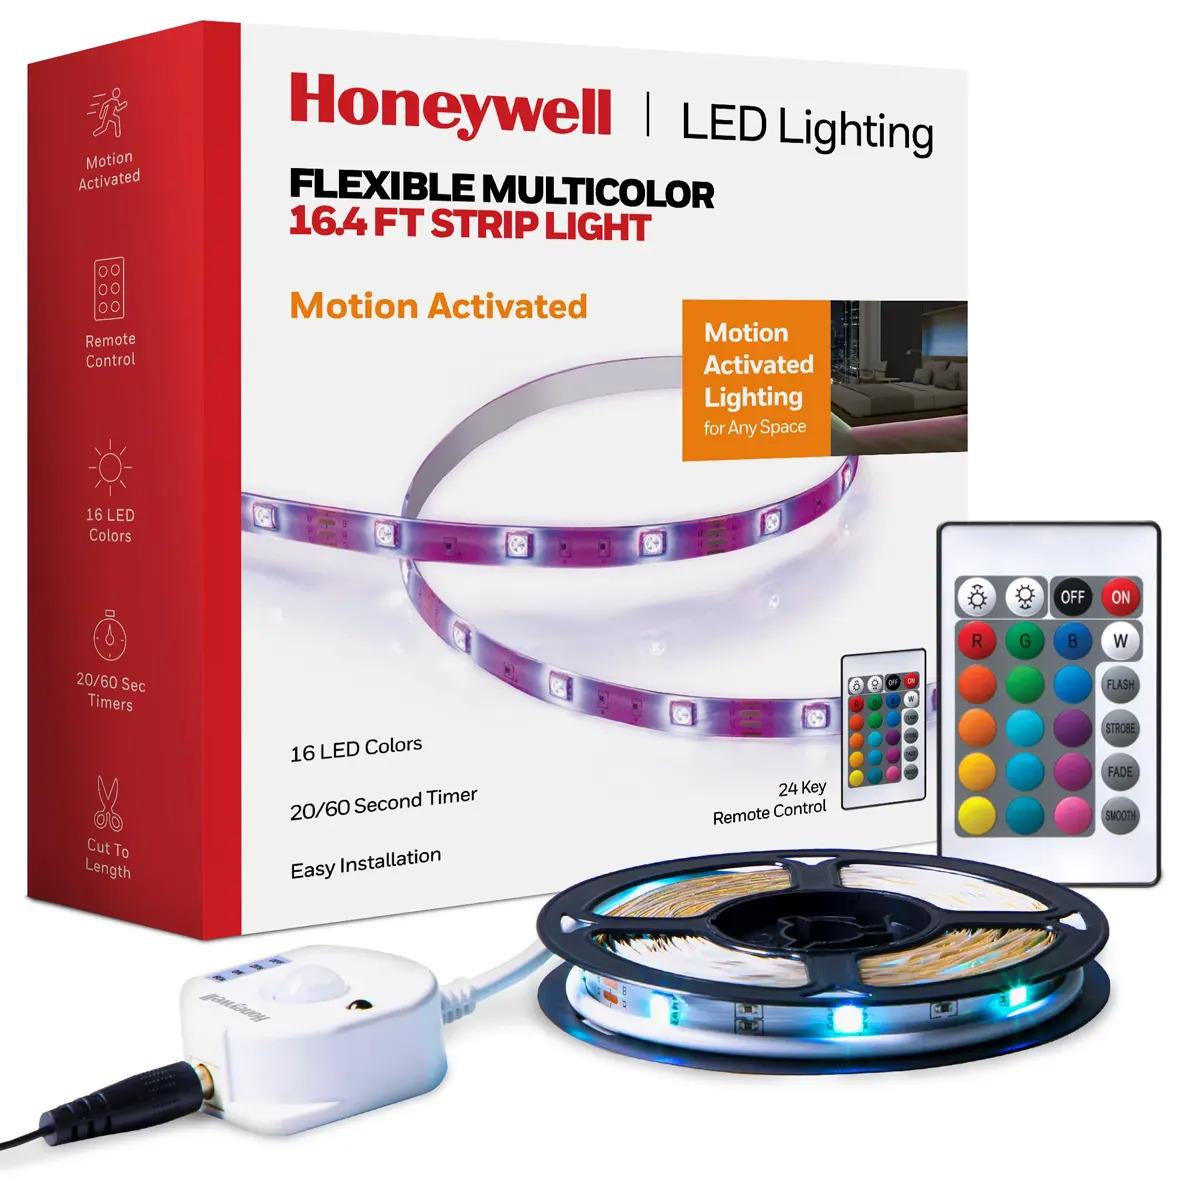 Honeywell Flexible Multicolor Motion Activated RGB Indoor LED Strip Light for $9.97